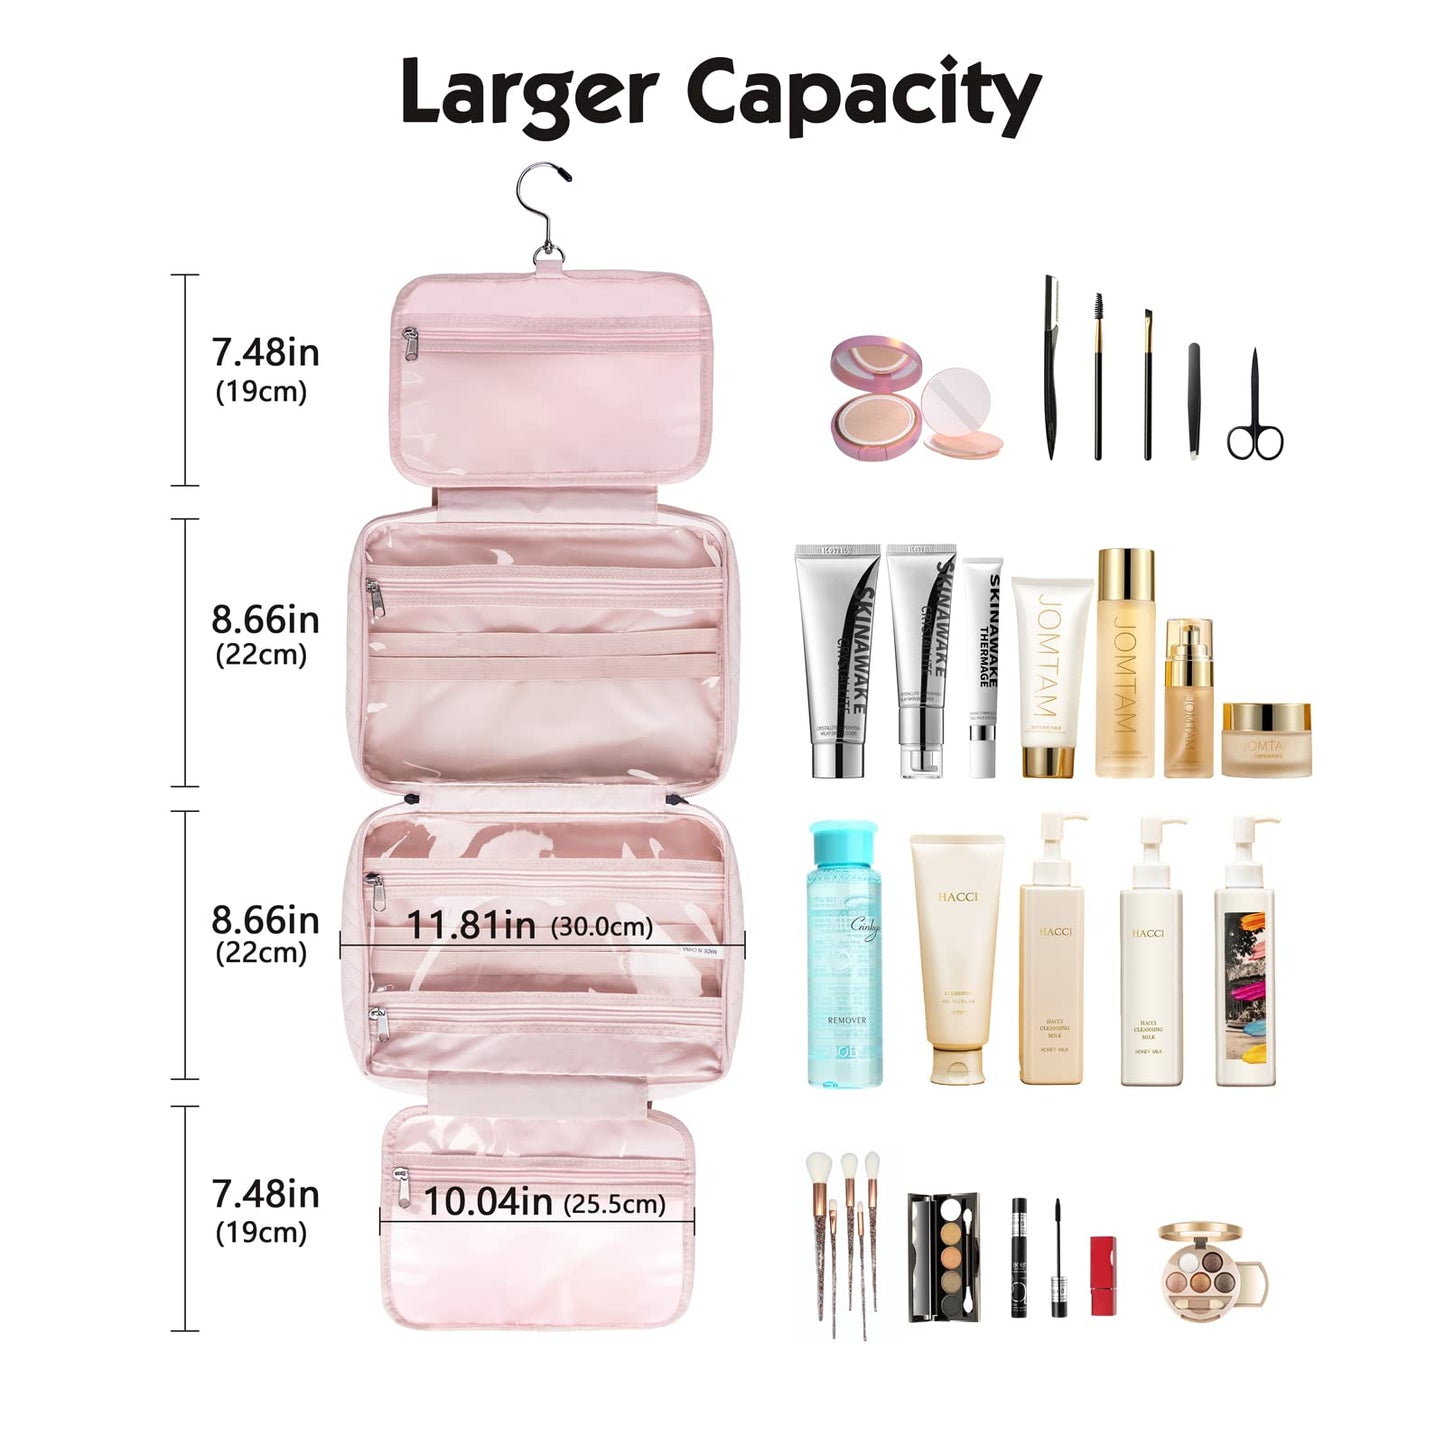 Lisacool Travel Toiletry Bag for Women with Hanging Hook, Large Portable Waterproof Makeup Cosmetic Bag Travel Organizer for Accessories, Cosmetics, Full Sized Toiletries, Pink